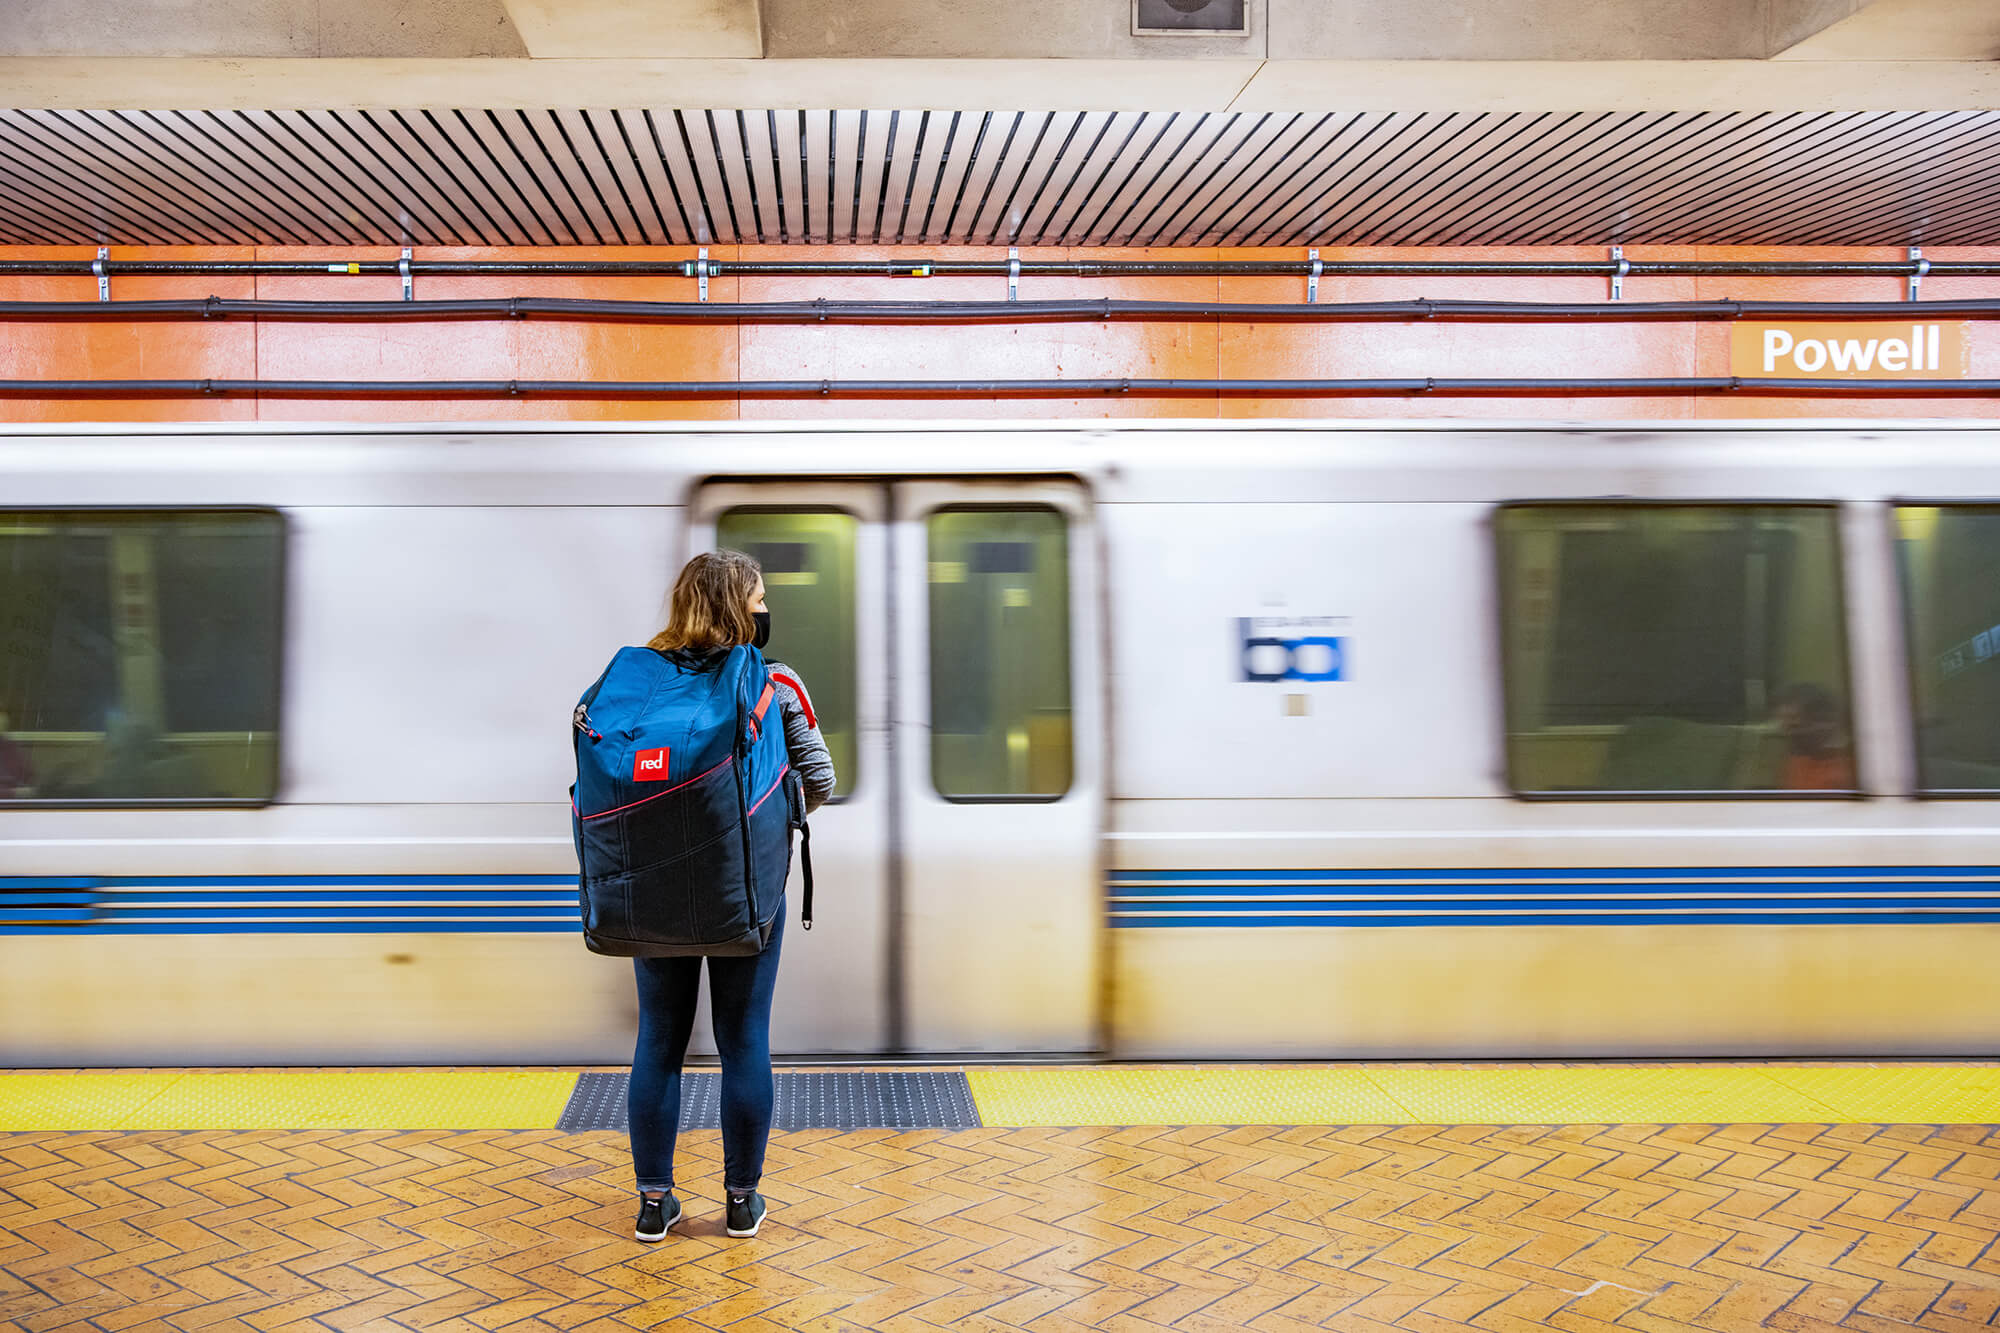 Woman With SUP Carrier On Her Back On A Powell Street Station Platform